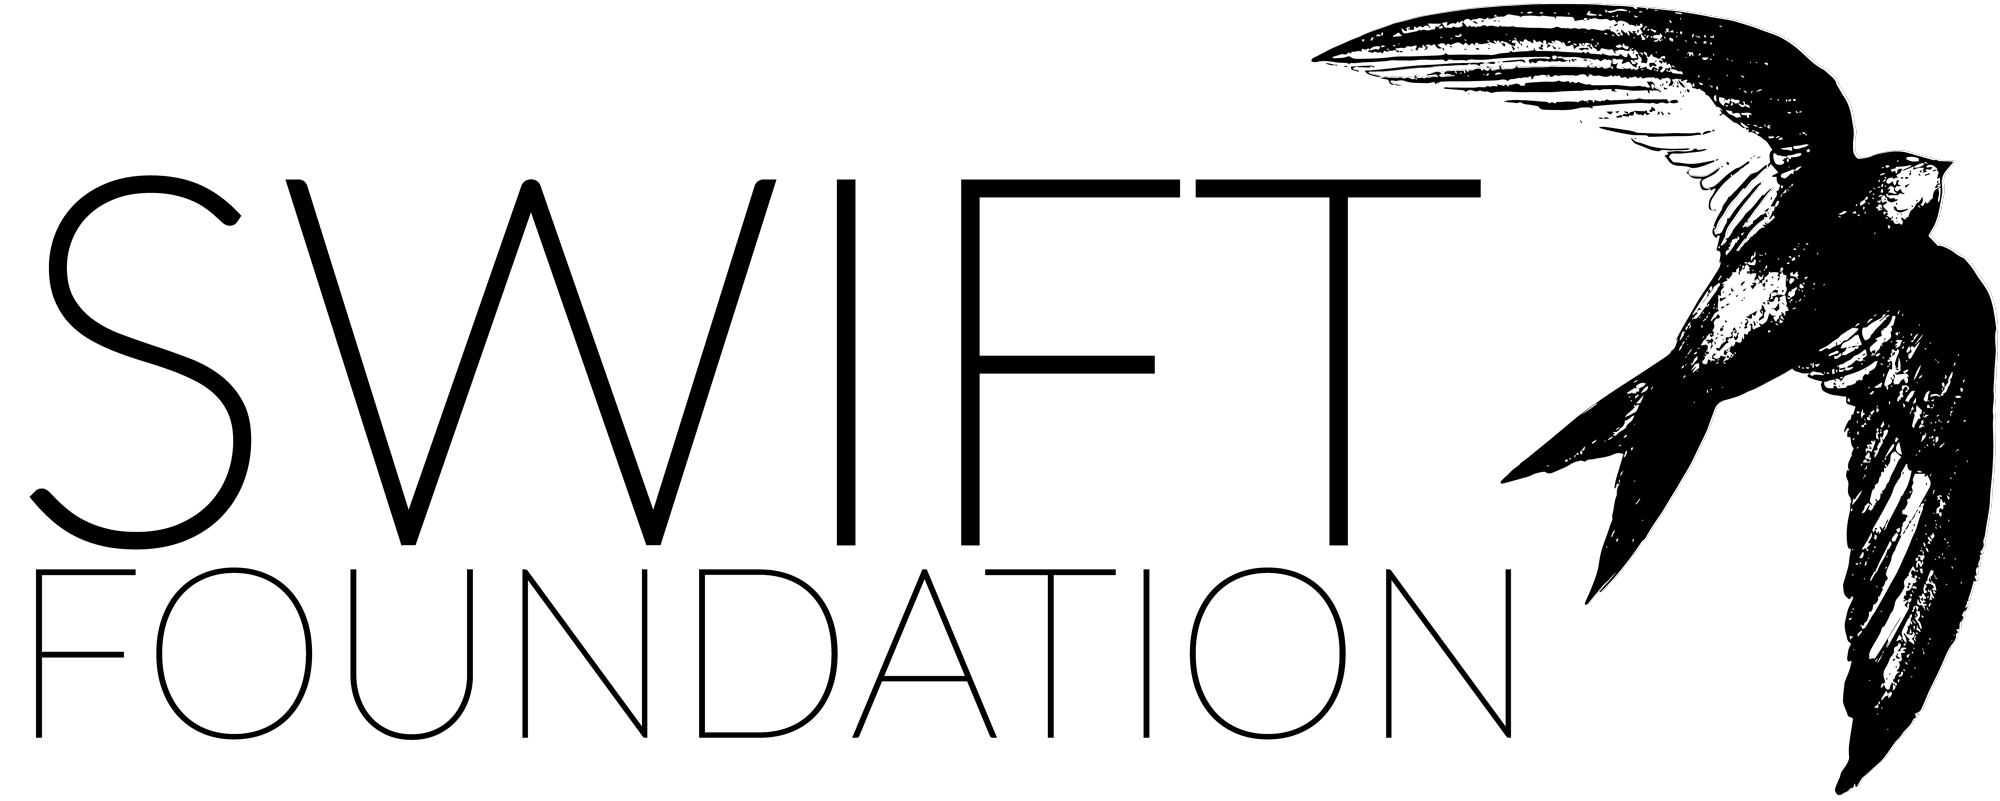 Swift Foundation Commits $1.2 Million to COVID-19 Response